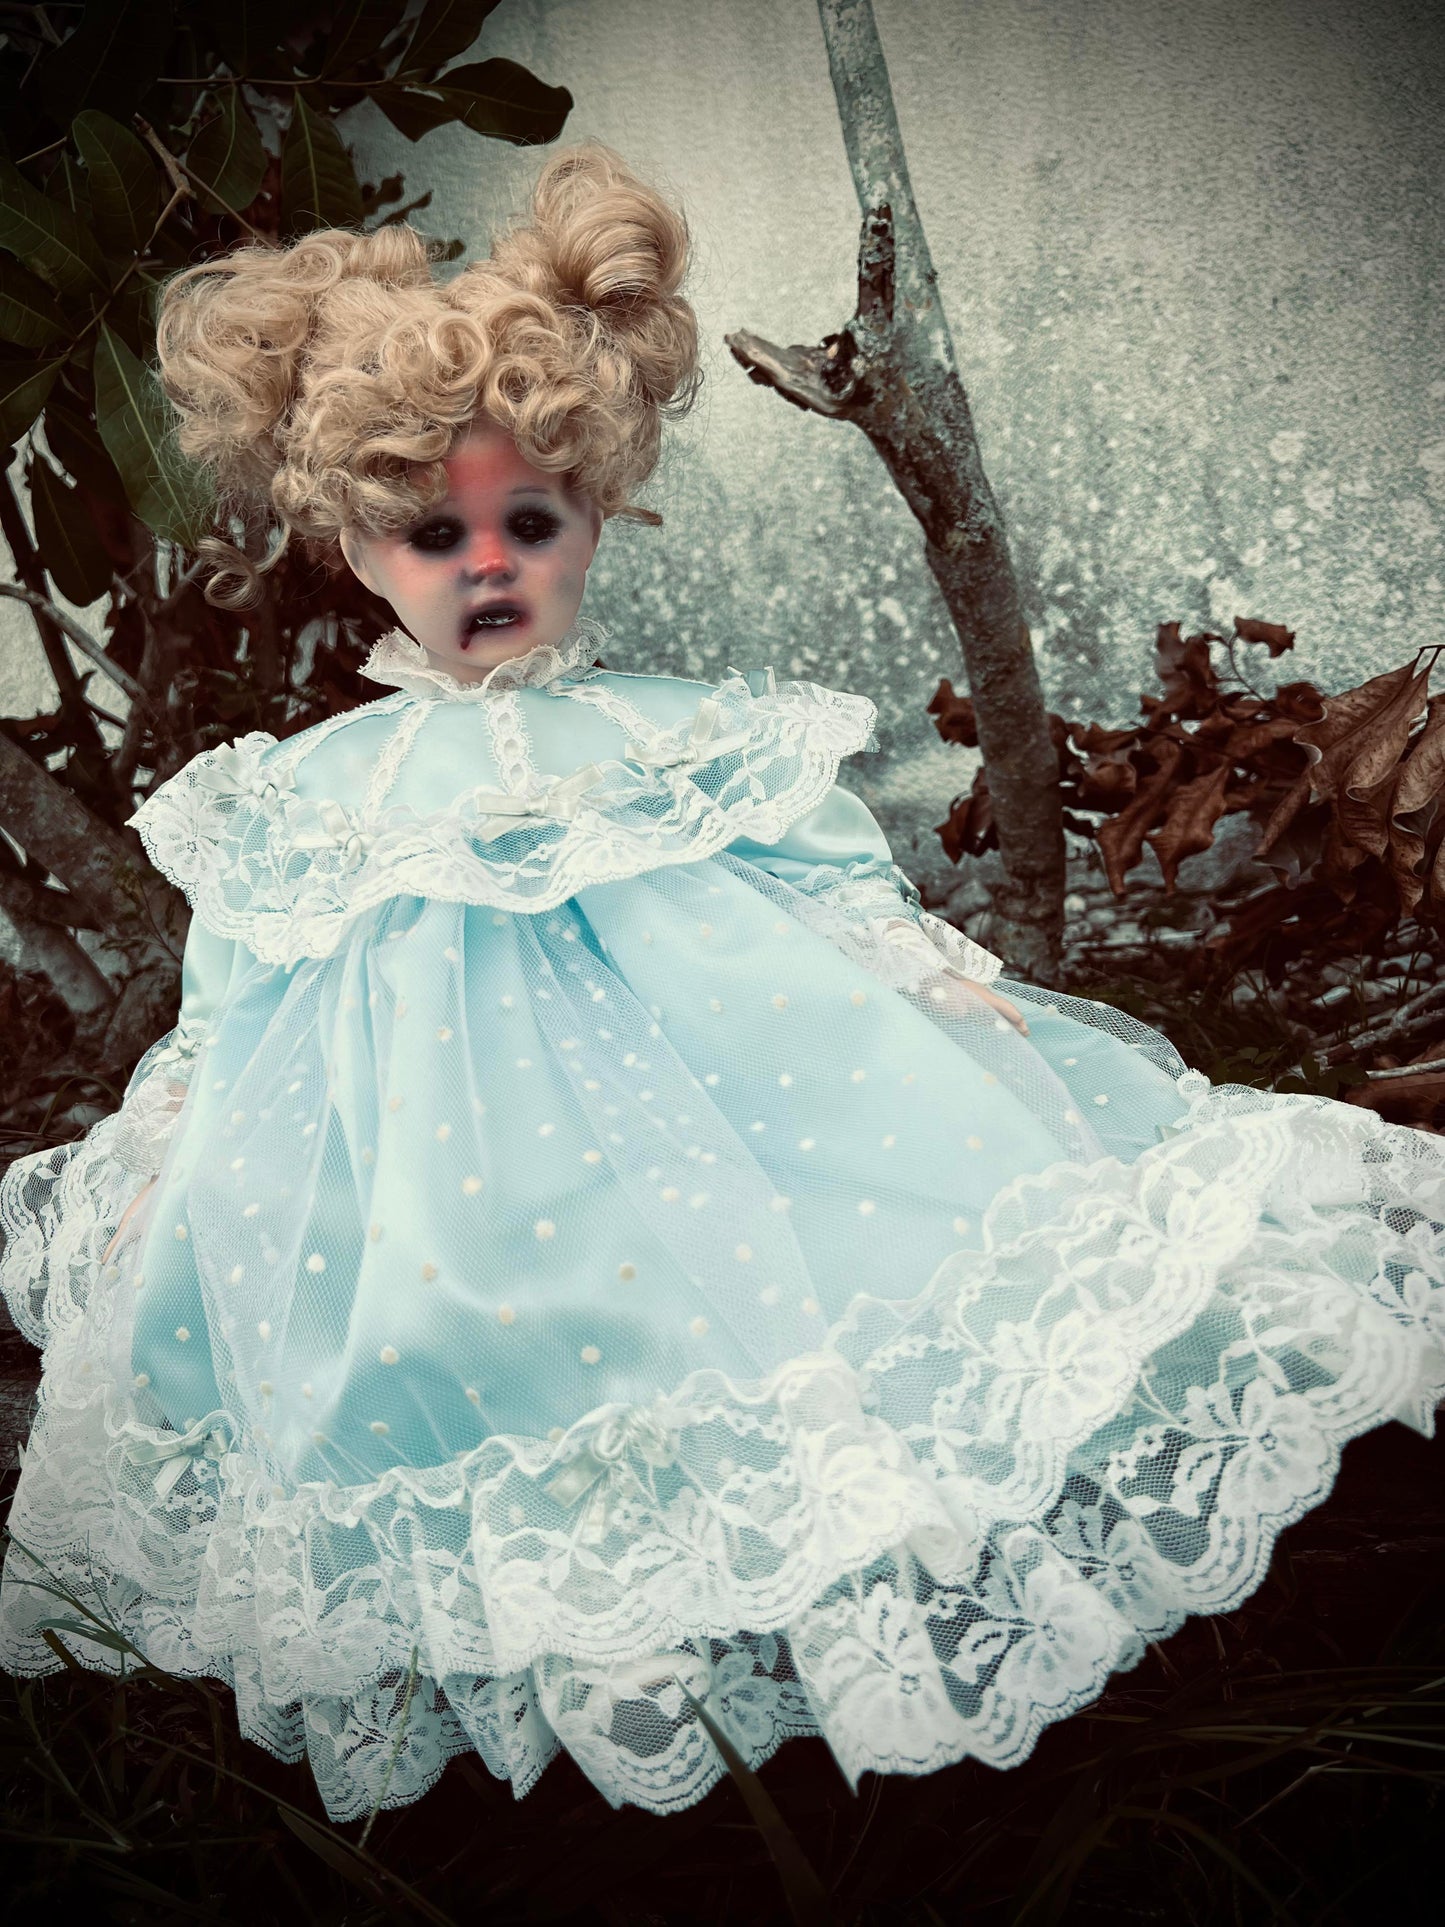 Meet Jannette 19" Doll Porcelain Witchy Creepy Haunted Spirit Infected Scary Spooky Zombie Possessed Fall Gothic Positive Energy